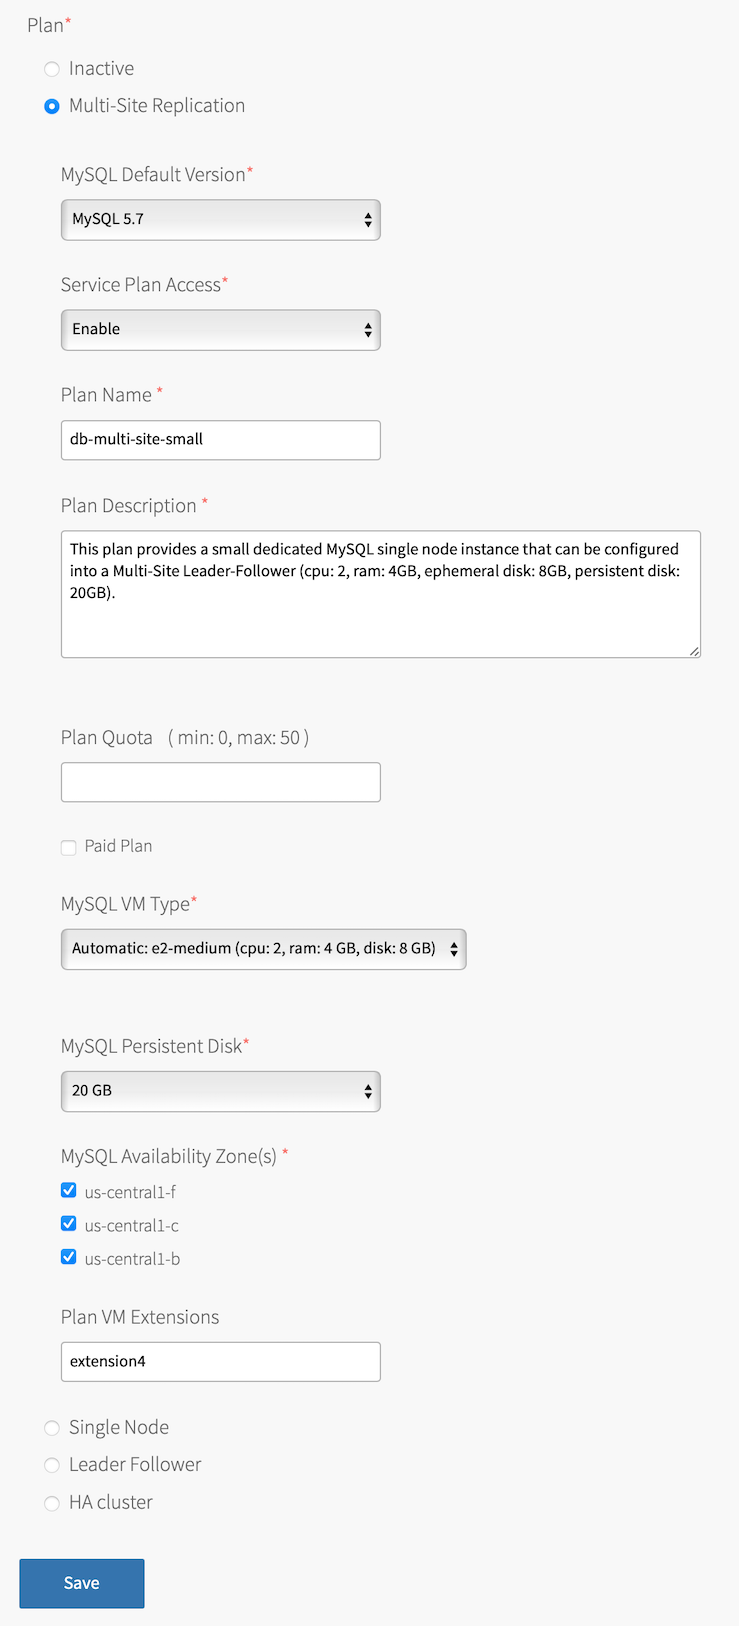 The 'Plan' section is shown and the radio button next to 'Multi-Site Replication' is selected. The table in the next step describes the fields that are revealed after selecting this plan.